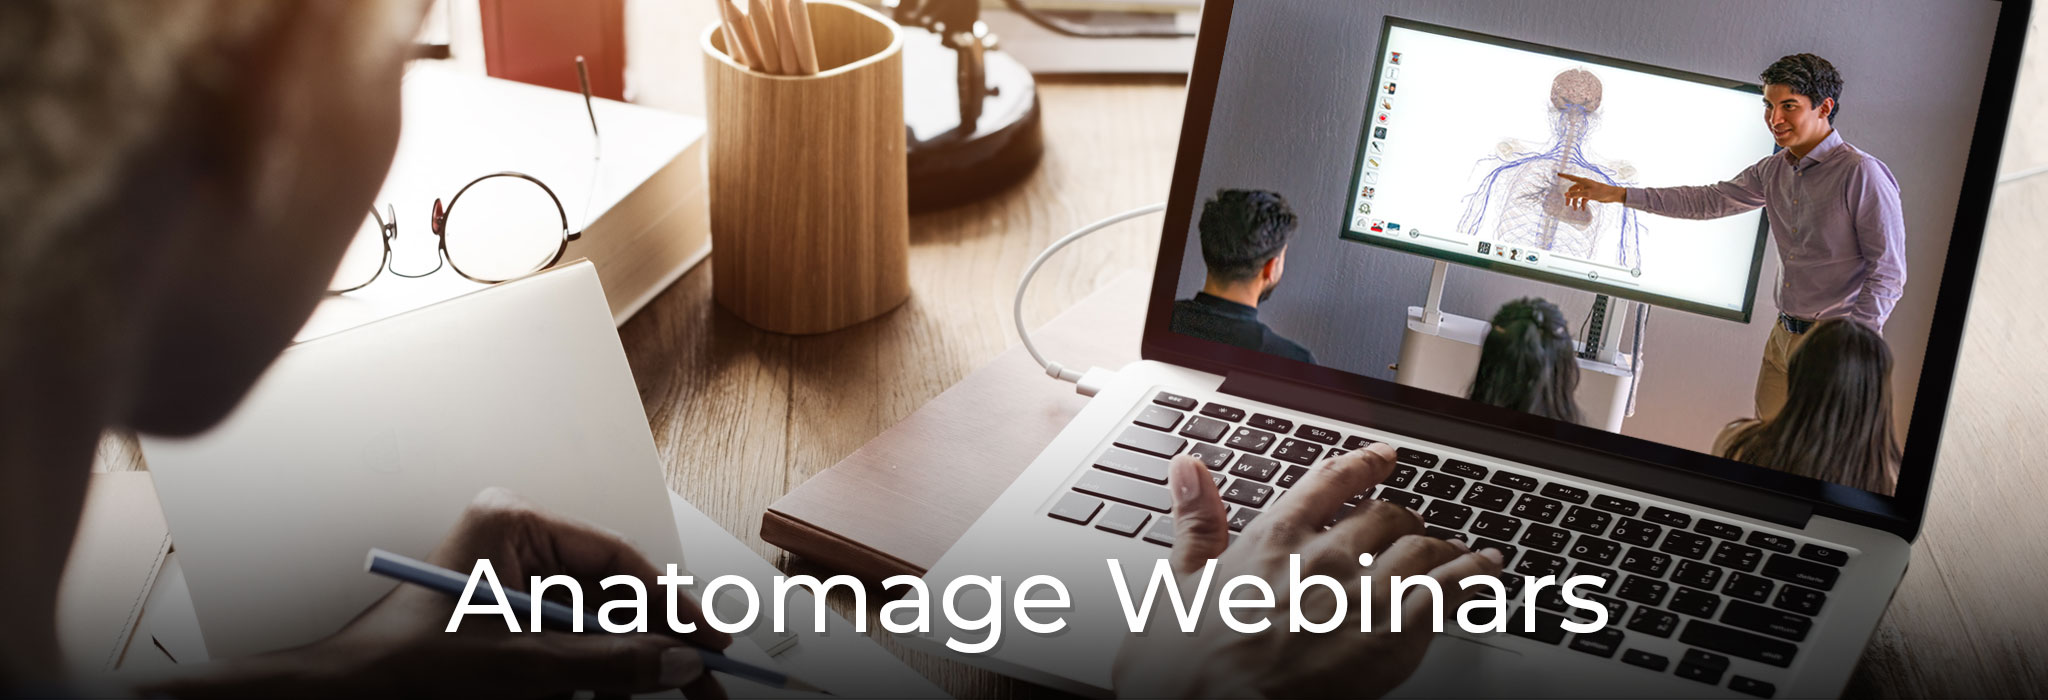 Anatomage Webinar Series is a free program that features webinars hosted by medical educator